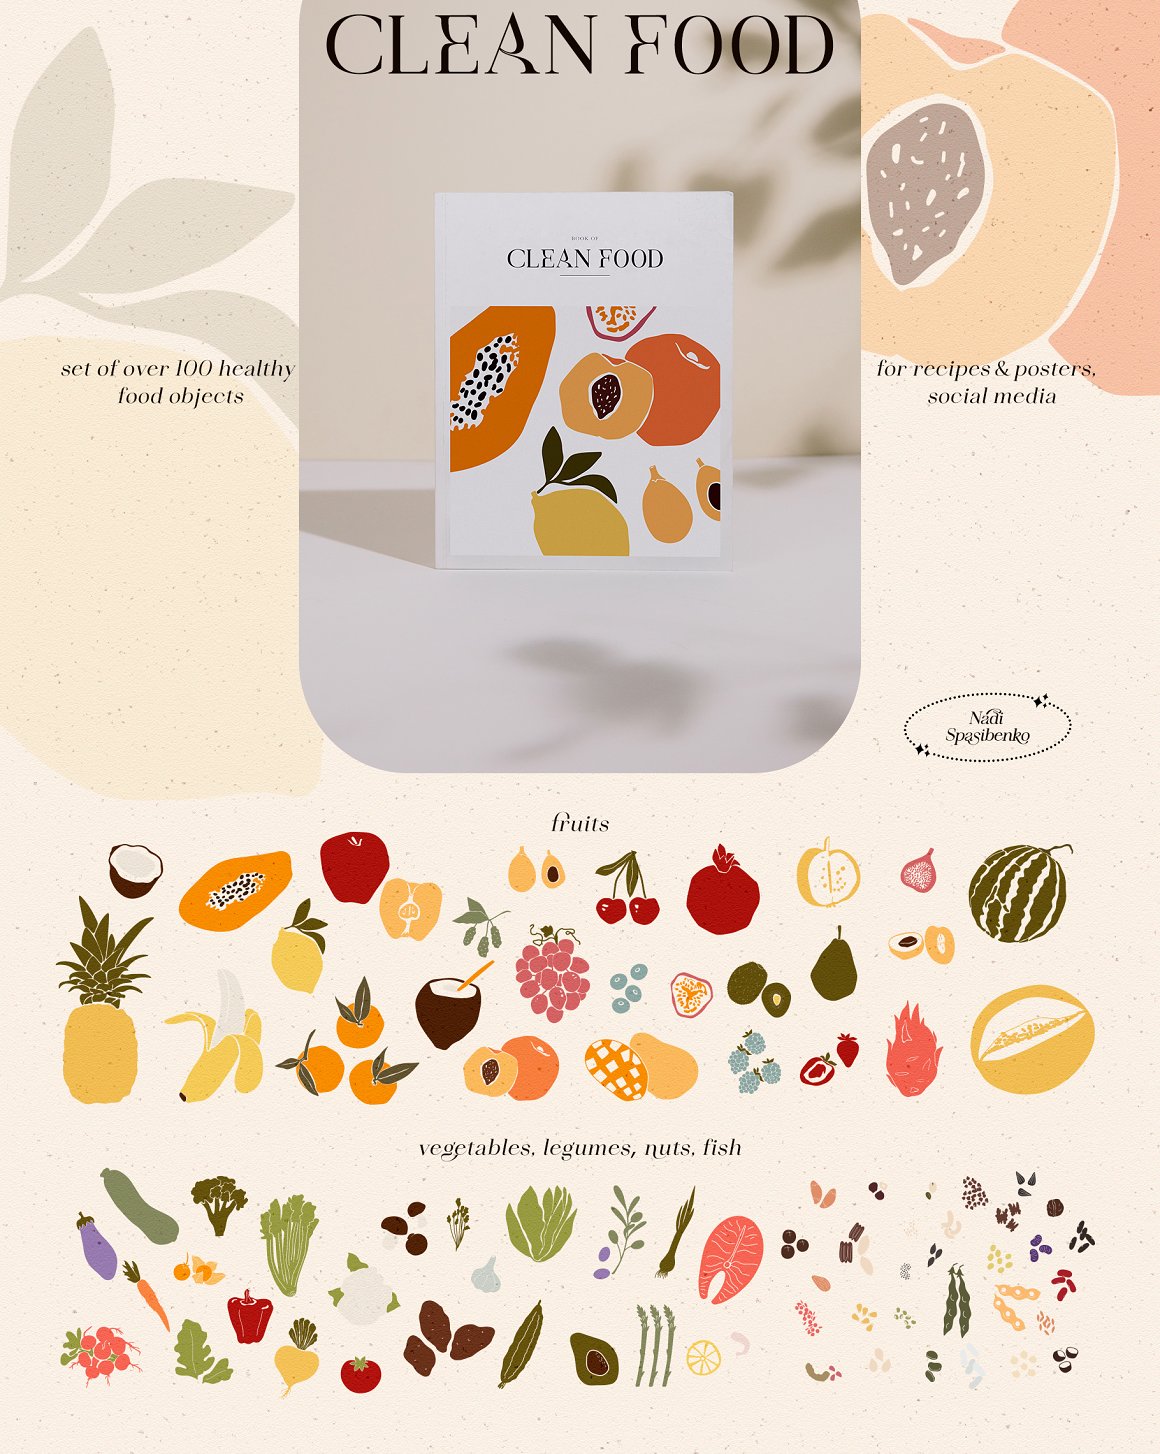 Collection of different illustrations of fruits, vegetables, legumes, nuts and fish.